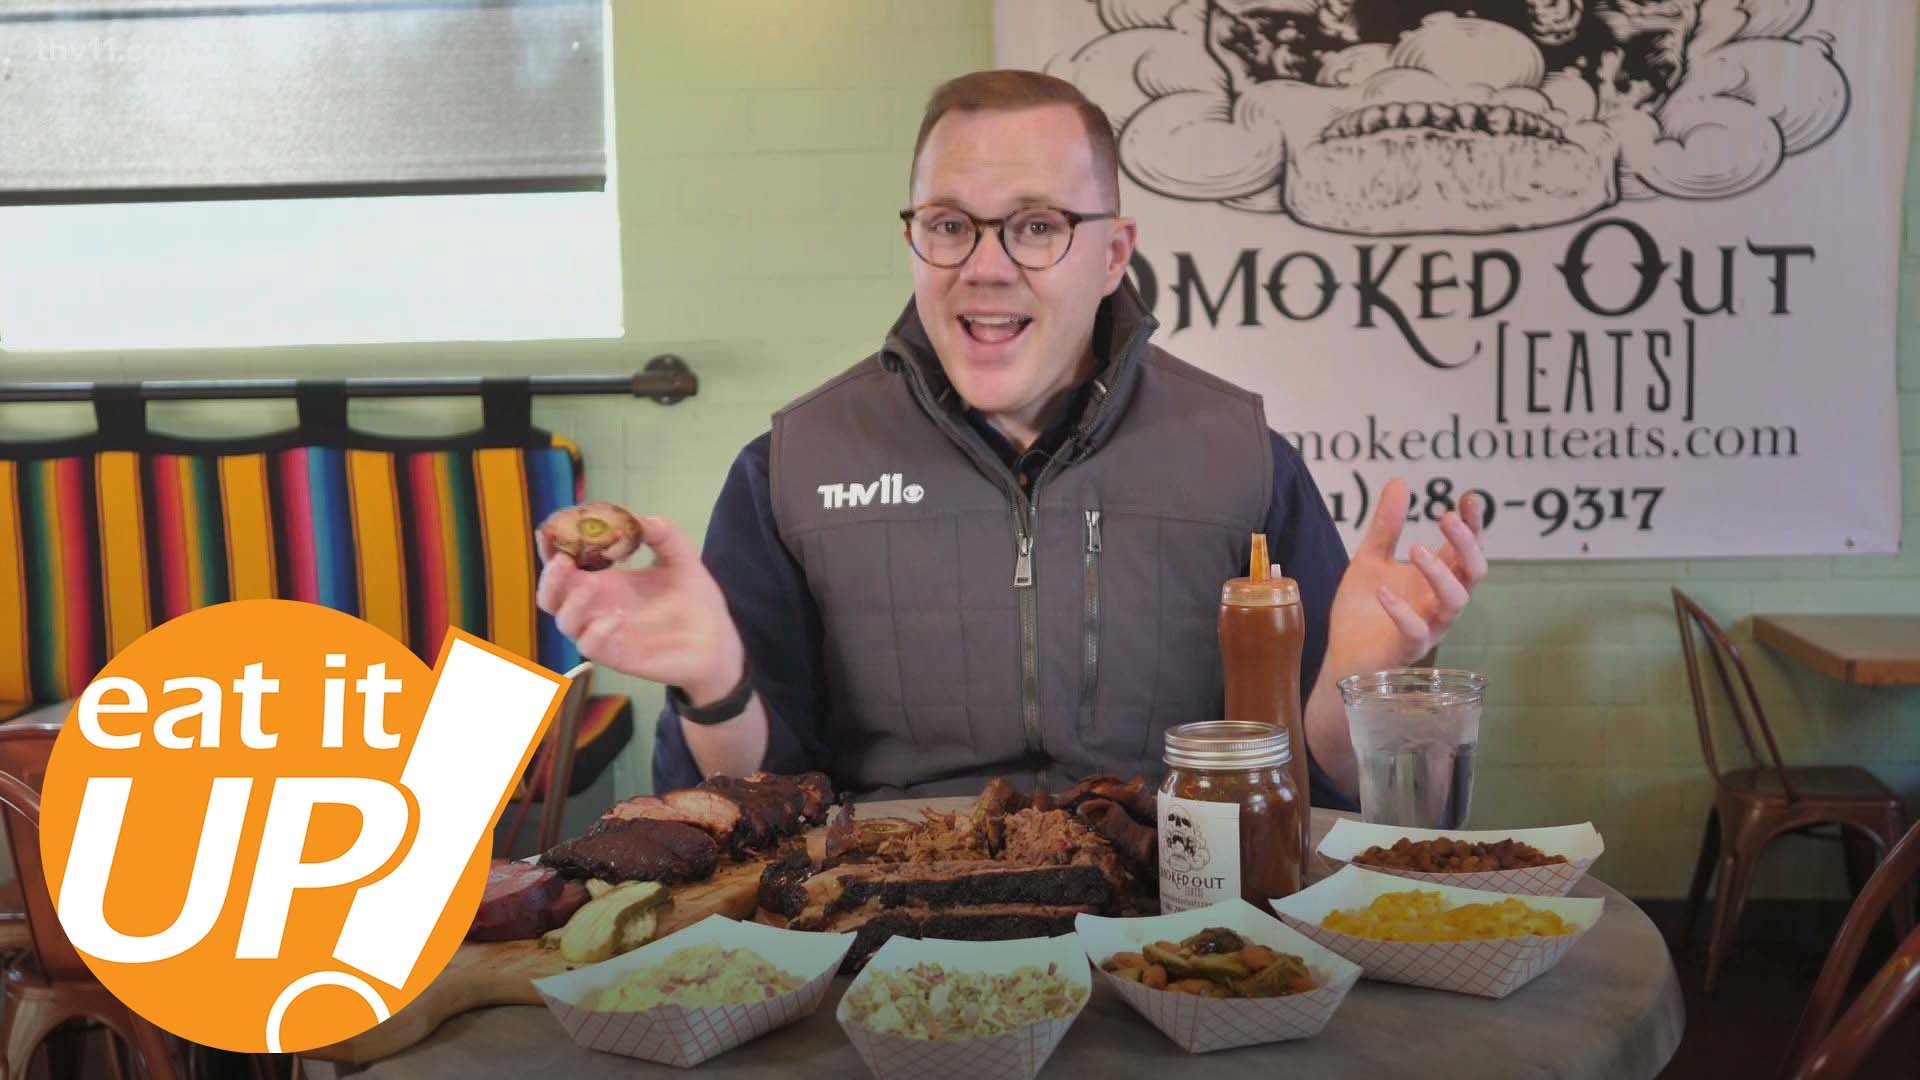 This week, Skot takes us to Smoked Out Eats, a local business known for its barbeque.